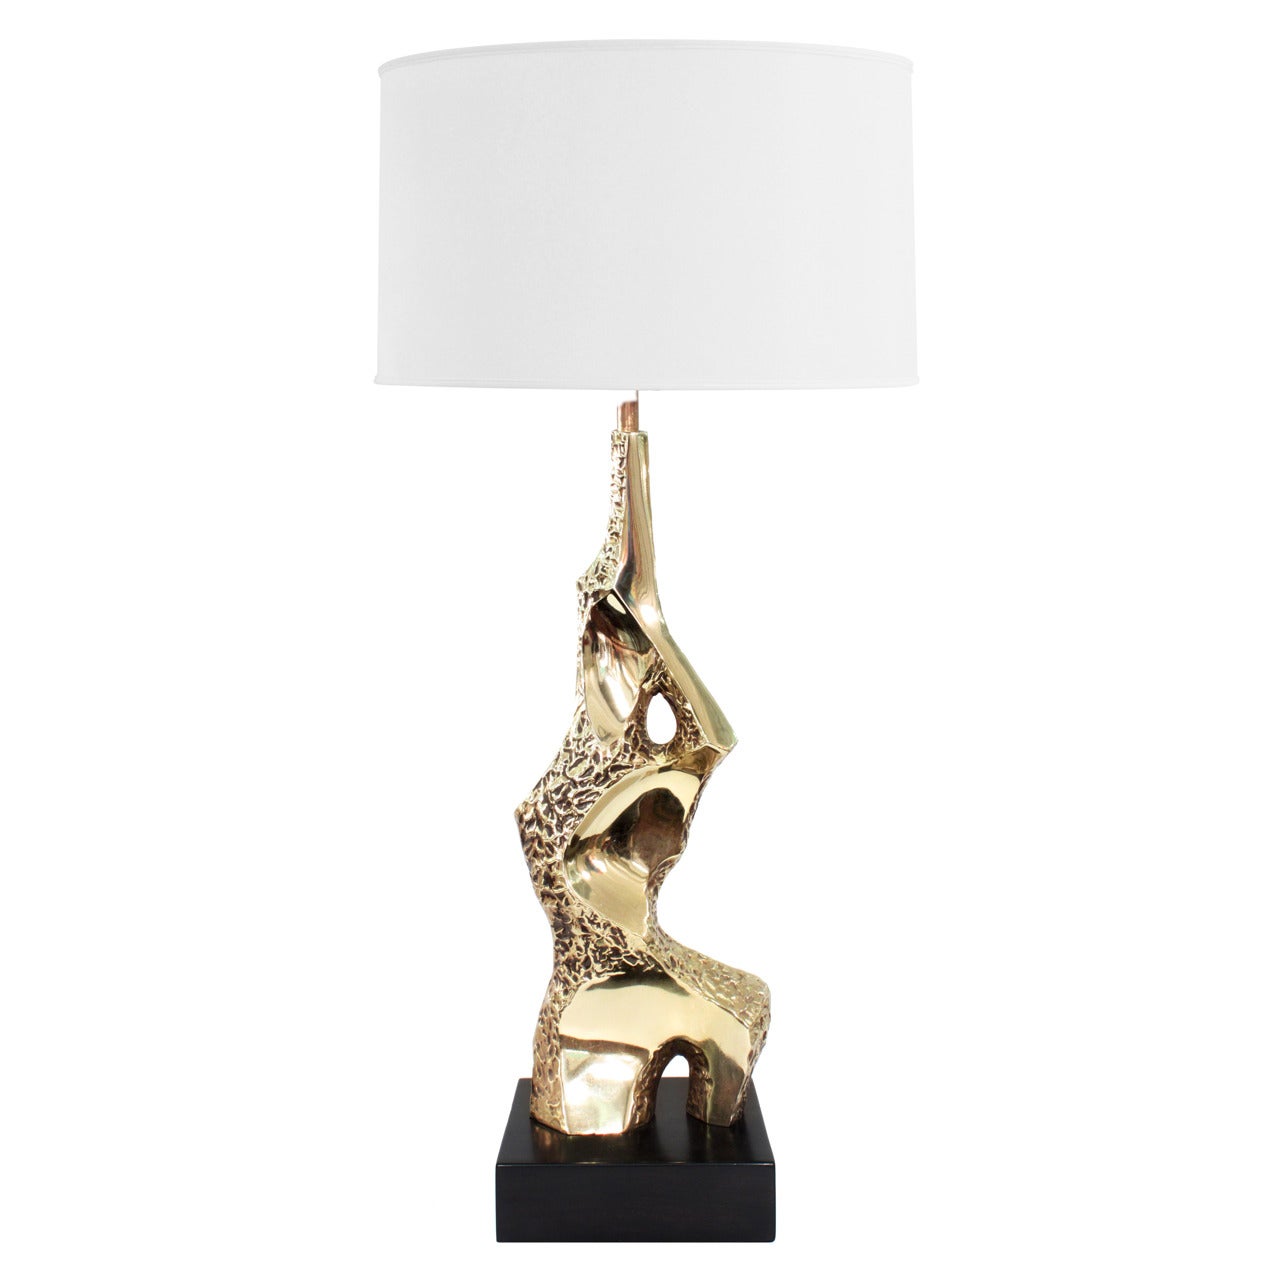 Sculptural Table Lamp in Polished Brass by Laurel